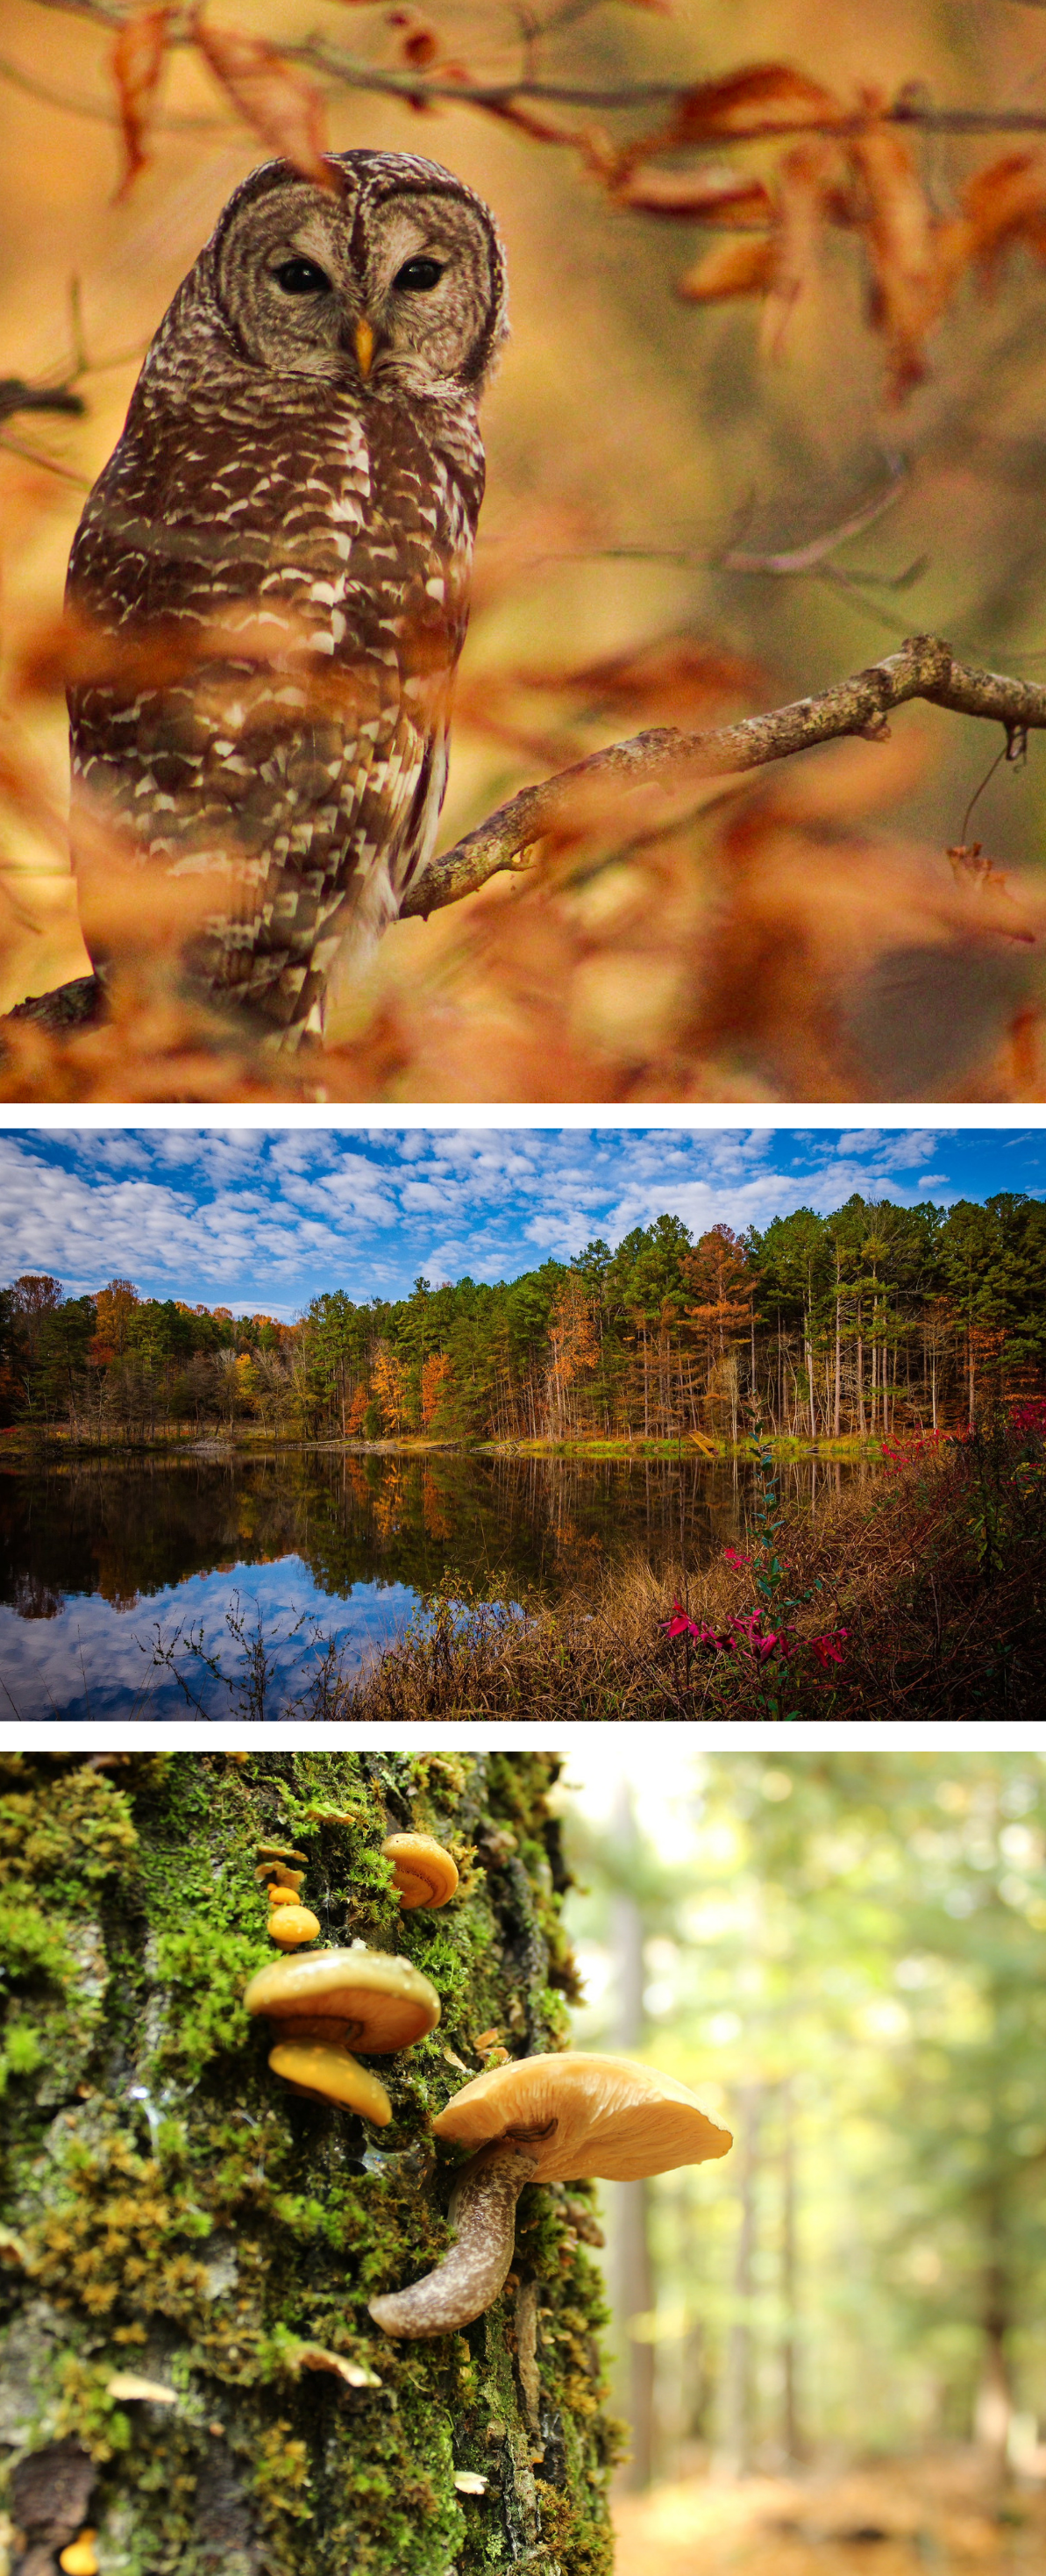 Montage: Top photo is of an owl in a tree; middle photo is a lake or pond surrounded by forest; last photo is a close-up of fungi on a tree